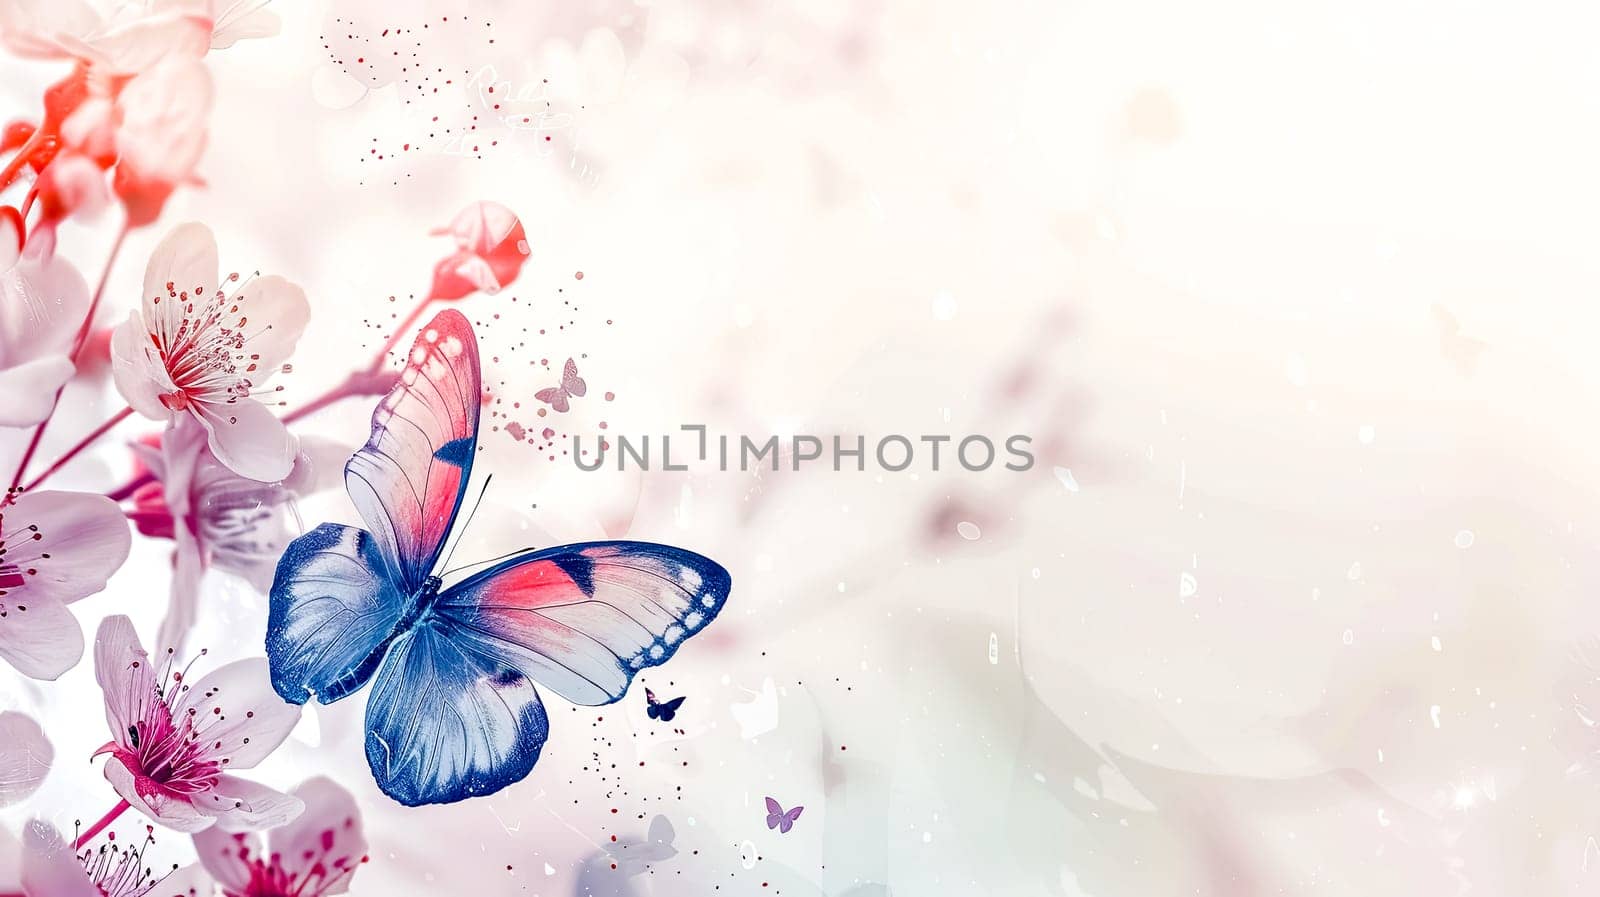 Spring awakening: cherry blossoms and butterflies, copy space by Edophoto